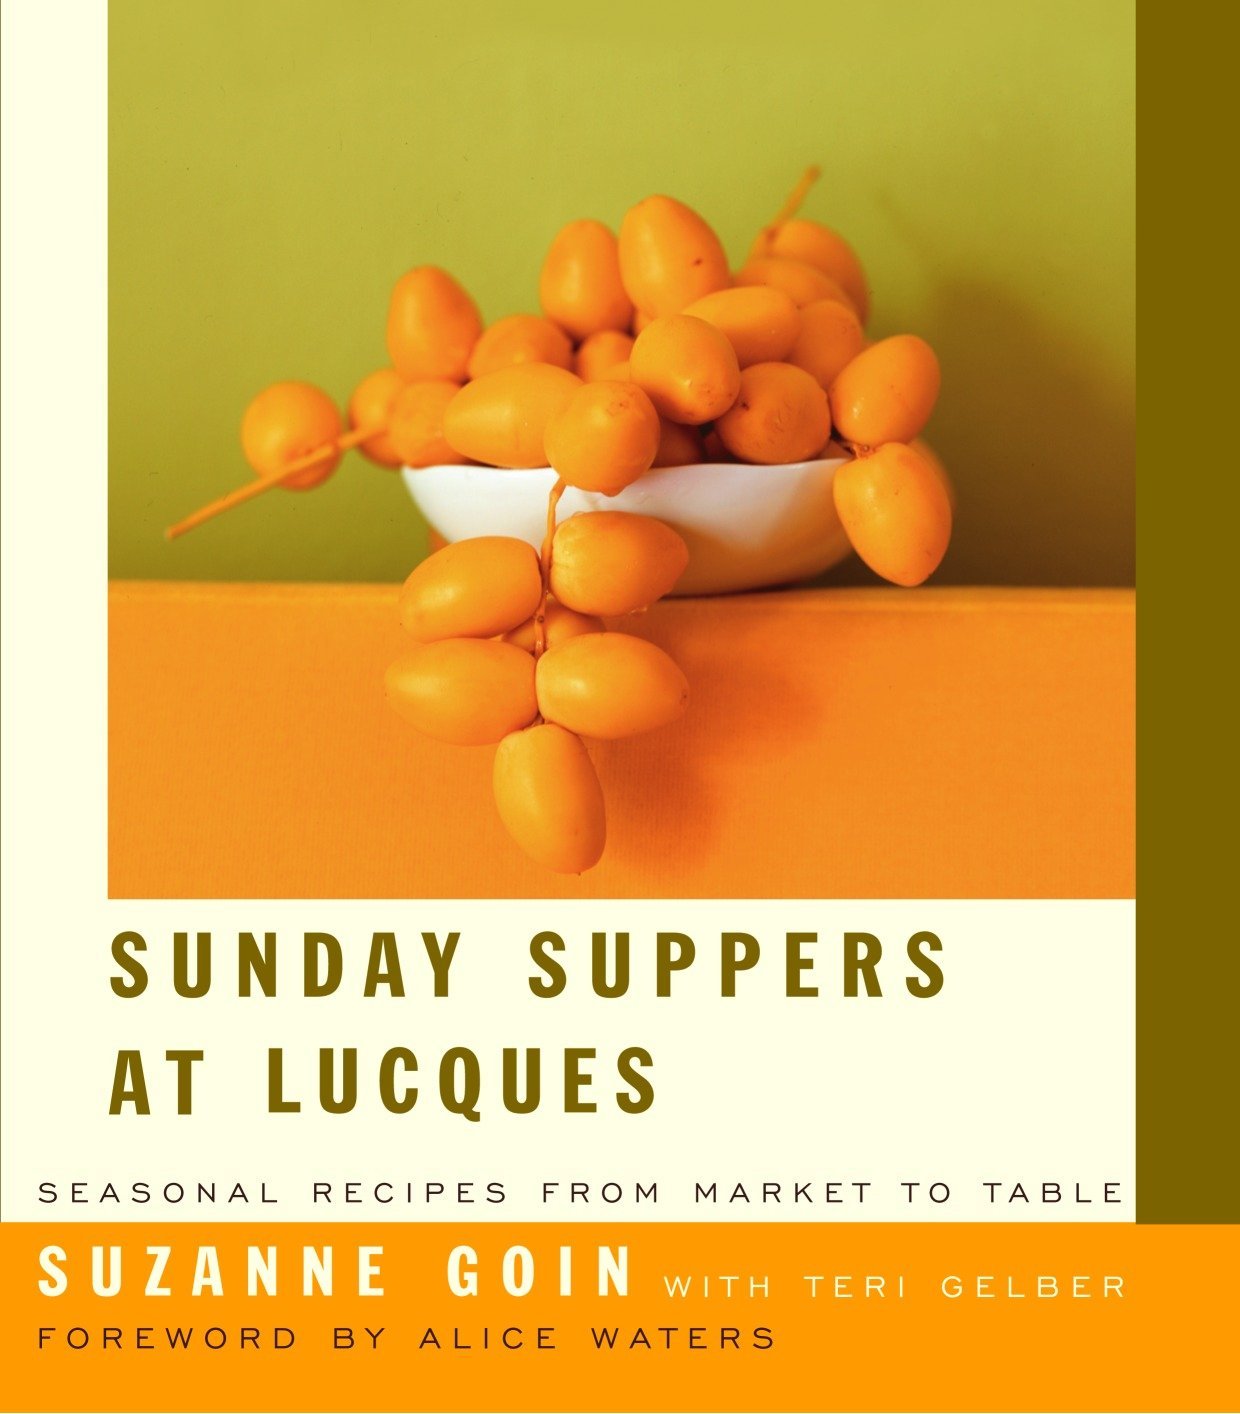 Sunday Suppers at Lucques: Seasonal Recipes from Market to Table